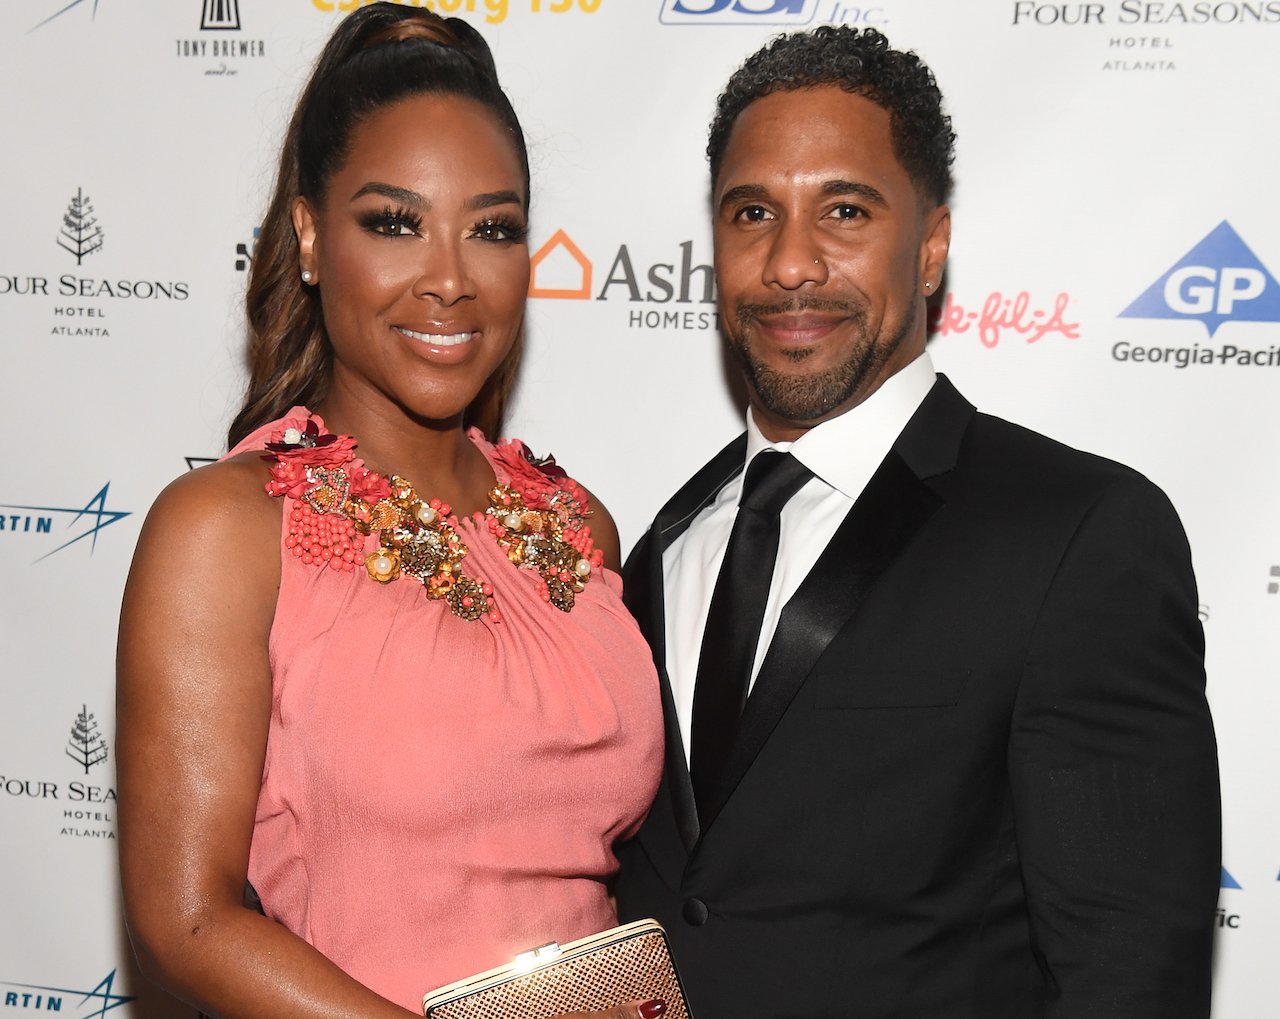 Kenya Moore poses for photo alongside Marc Daly; Moore wishes she would have signed a prenup before they wed